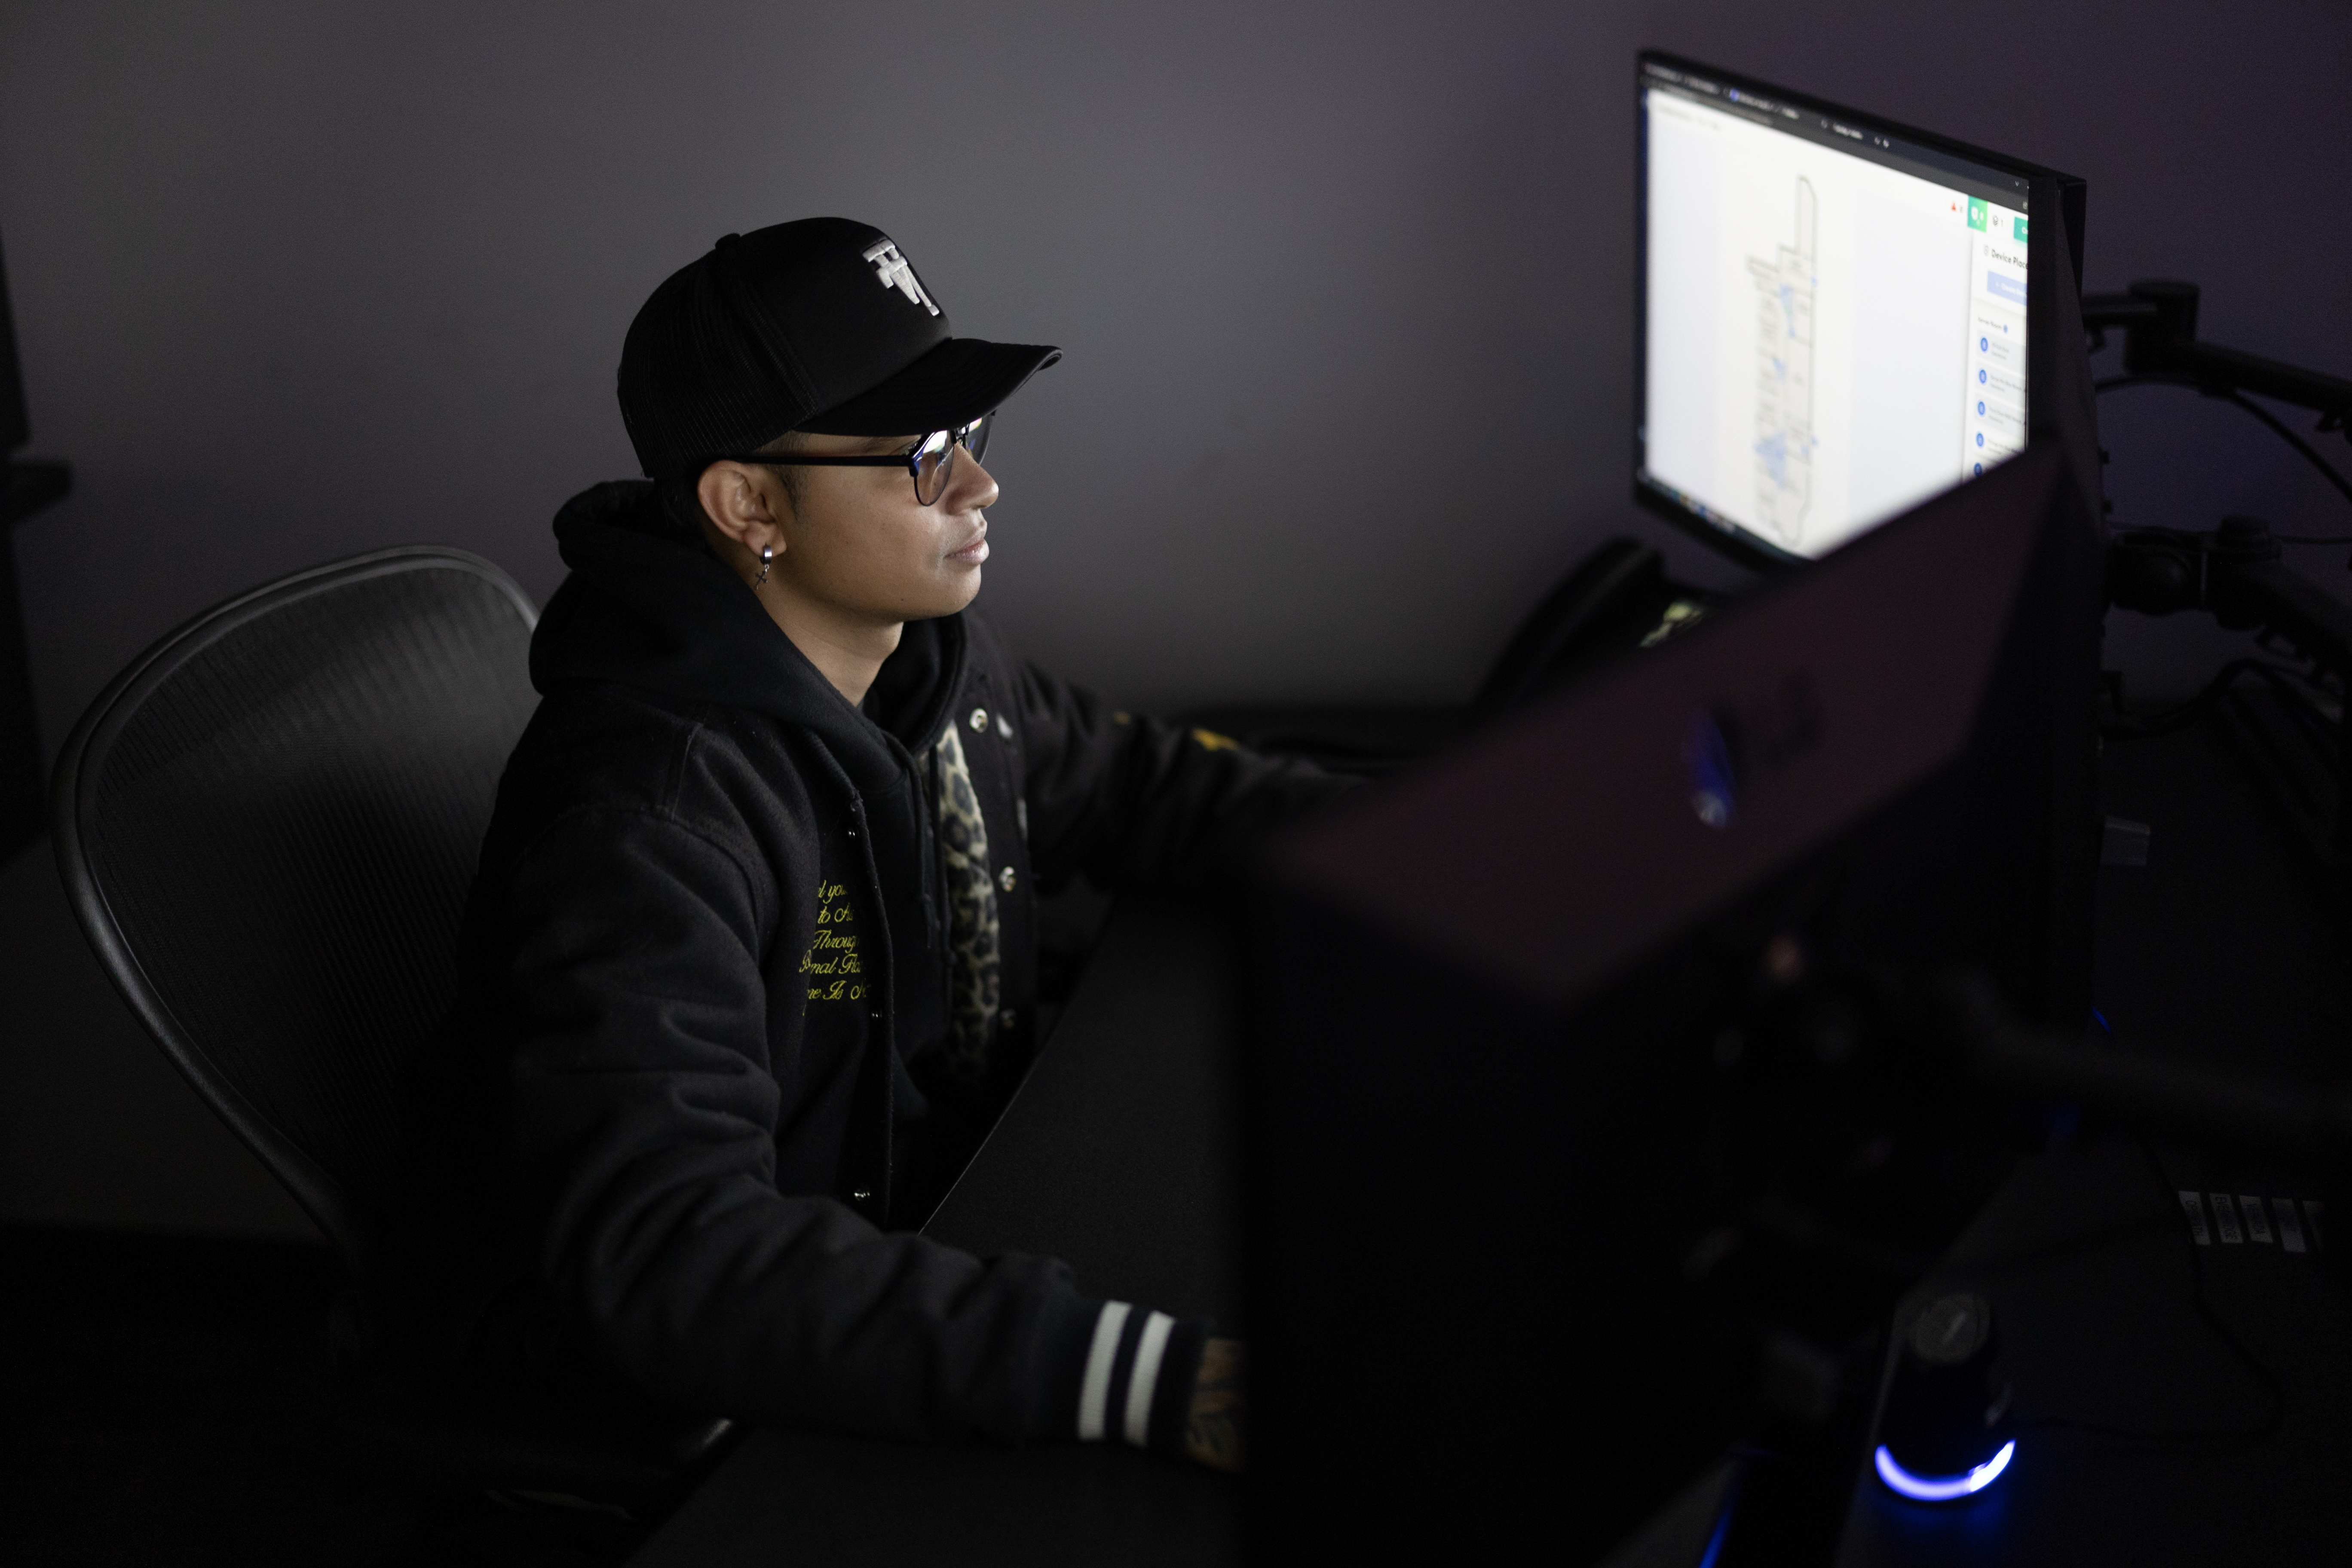 A security operator views a screen in a dark and shadowy global security operations center, wearing glasses, a black hat and black hoodie.